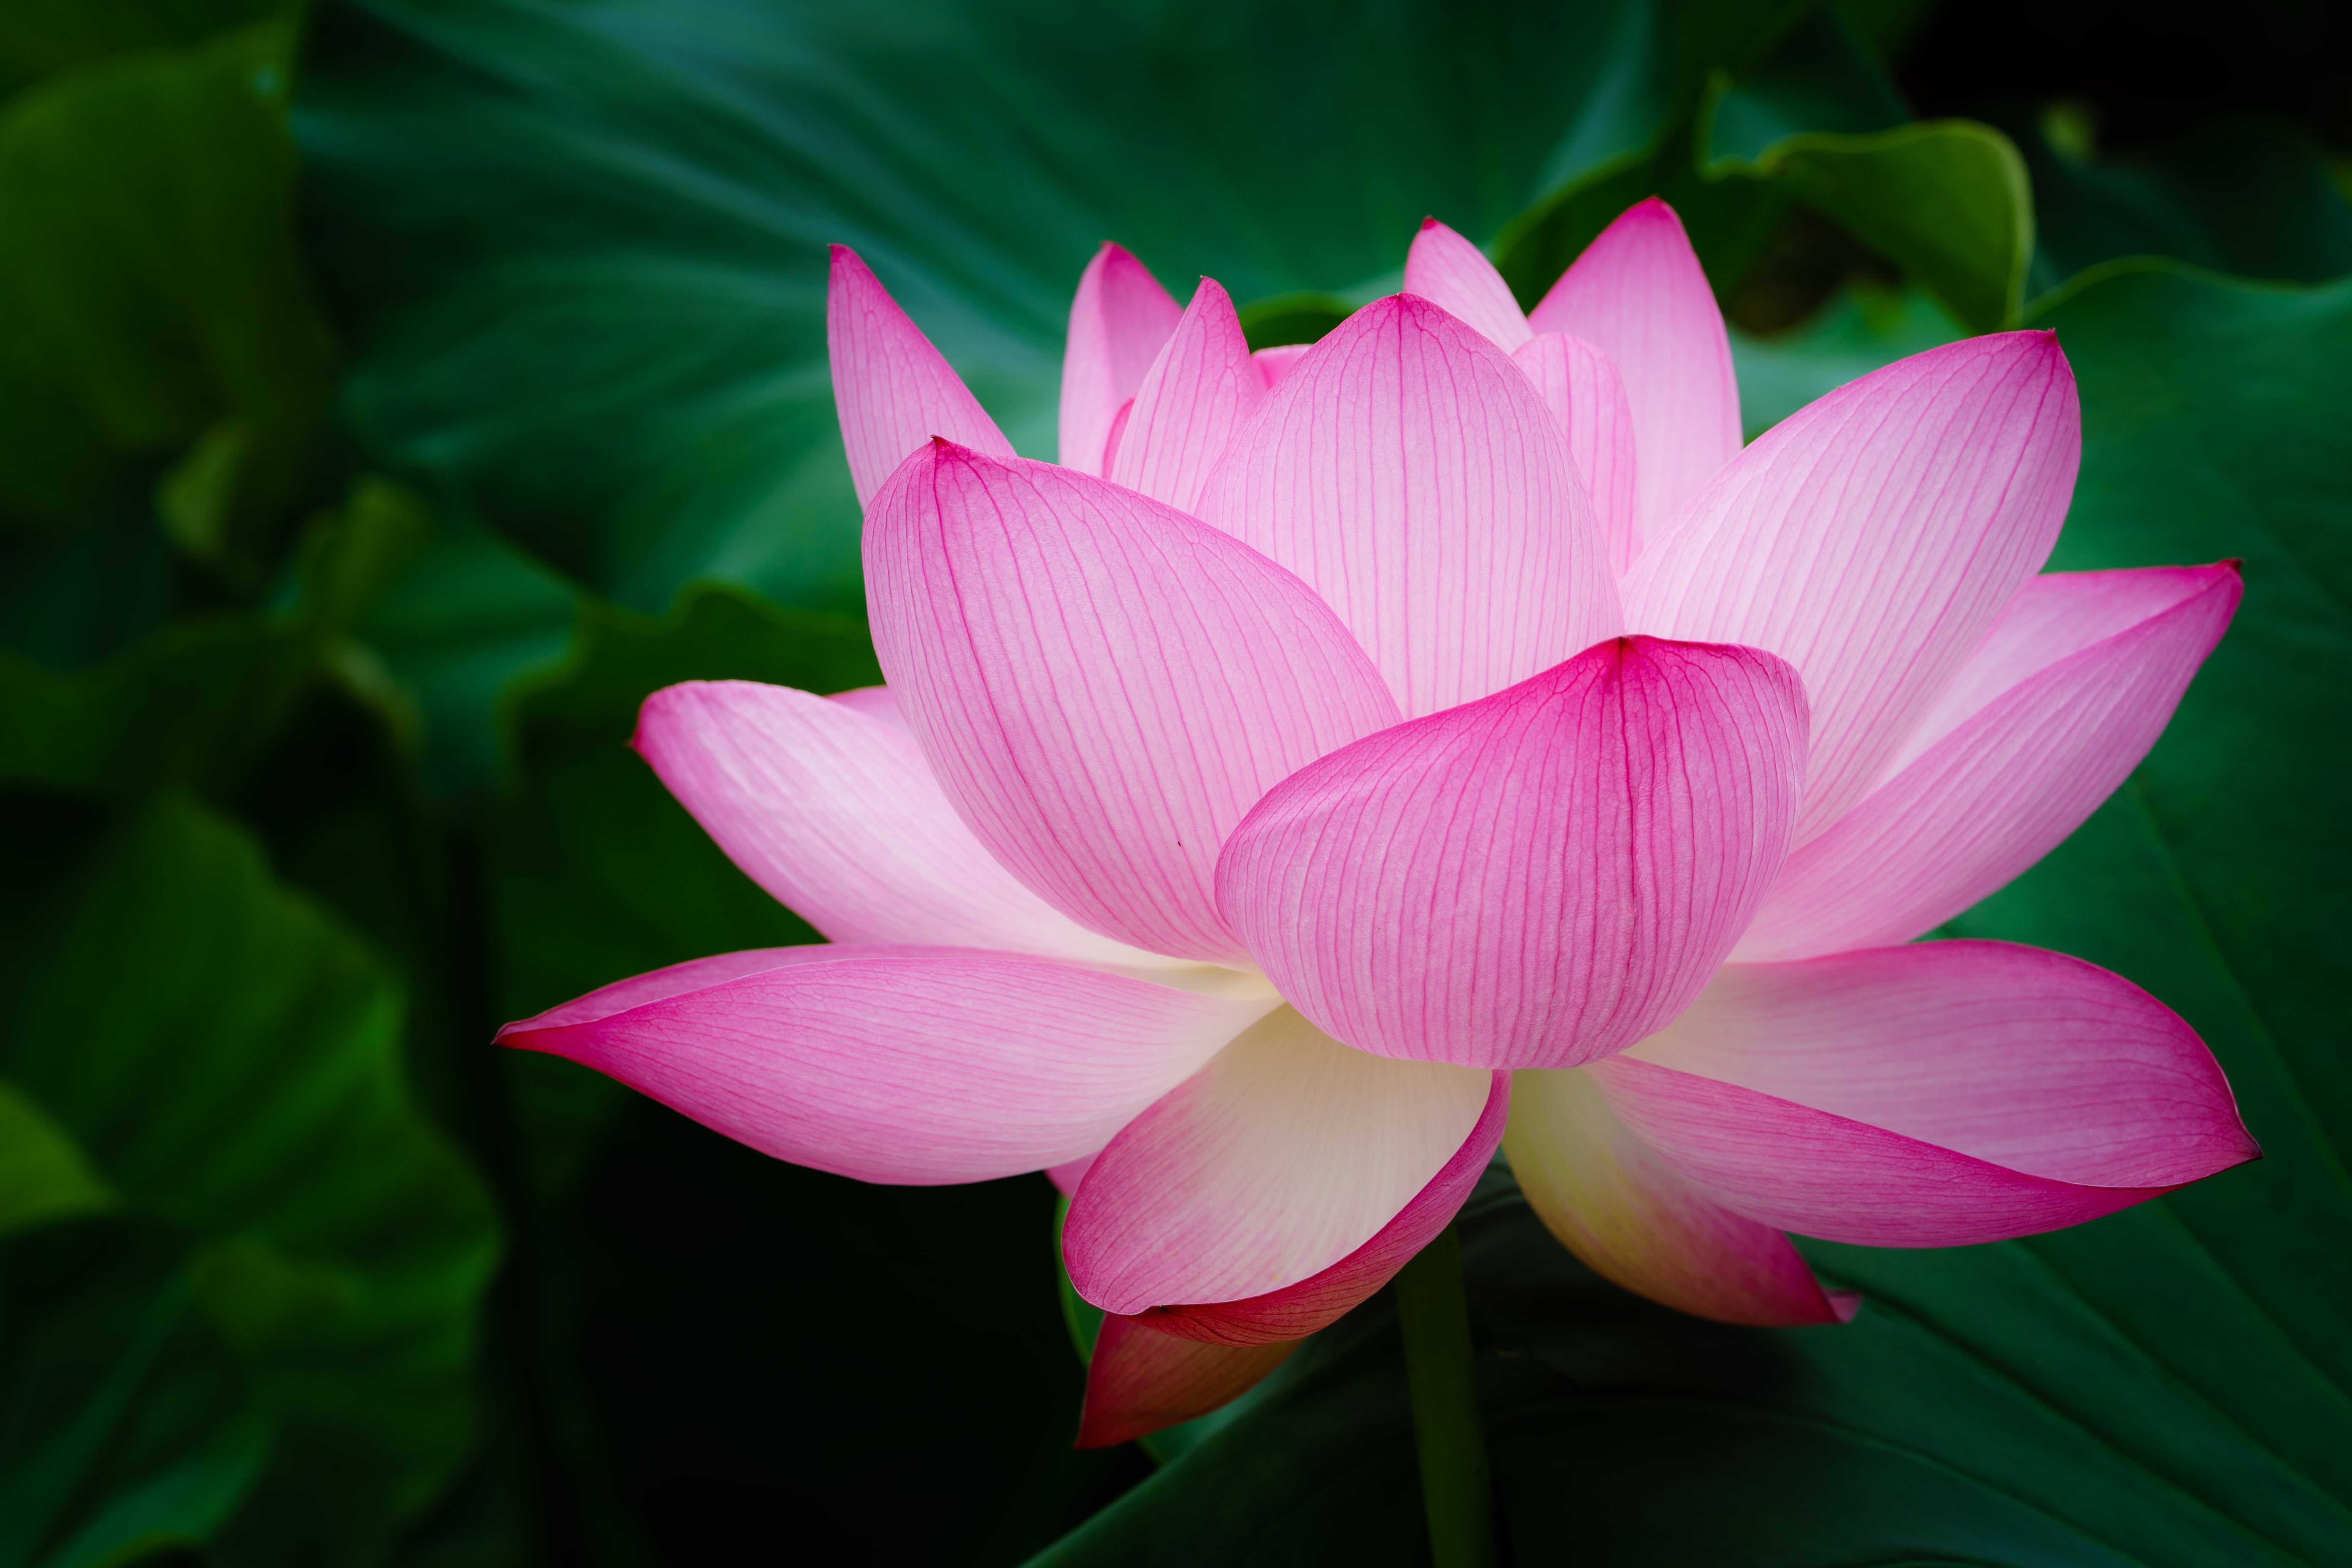 Blooming Lotus Flower Selective Focus Photography Hd Wallpaper ...